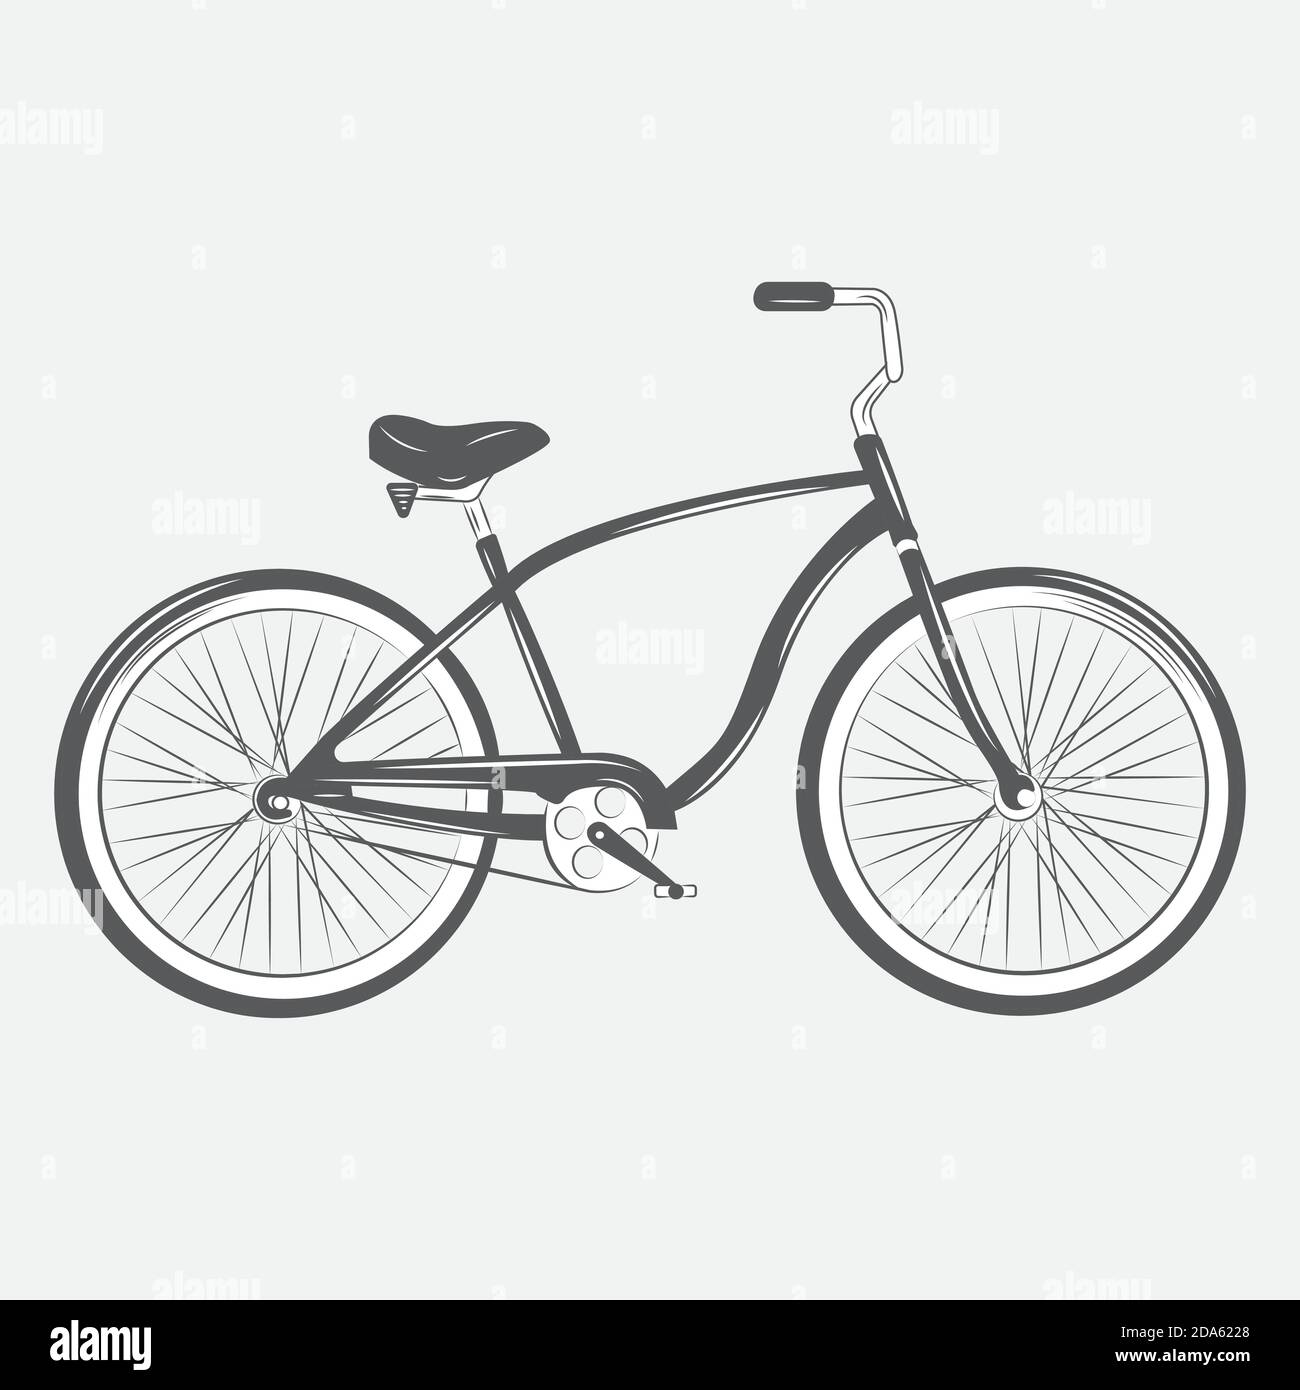 Bicycle silhouette . Bicycle Vector illustration. Stock Vector